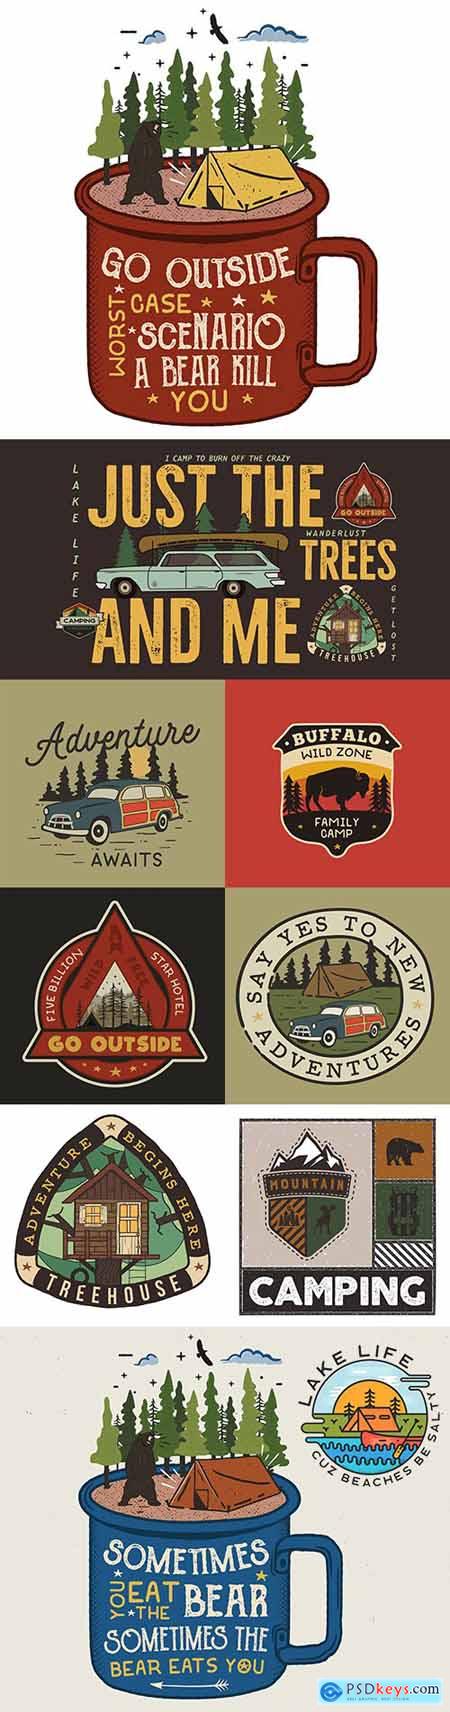 Camping badge design and adventure logo with quote